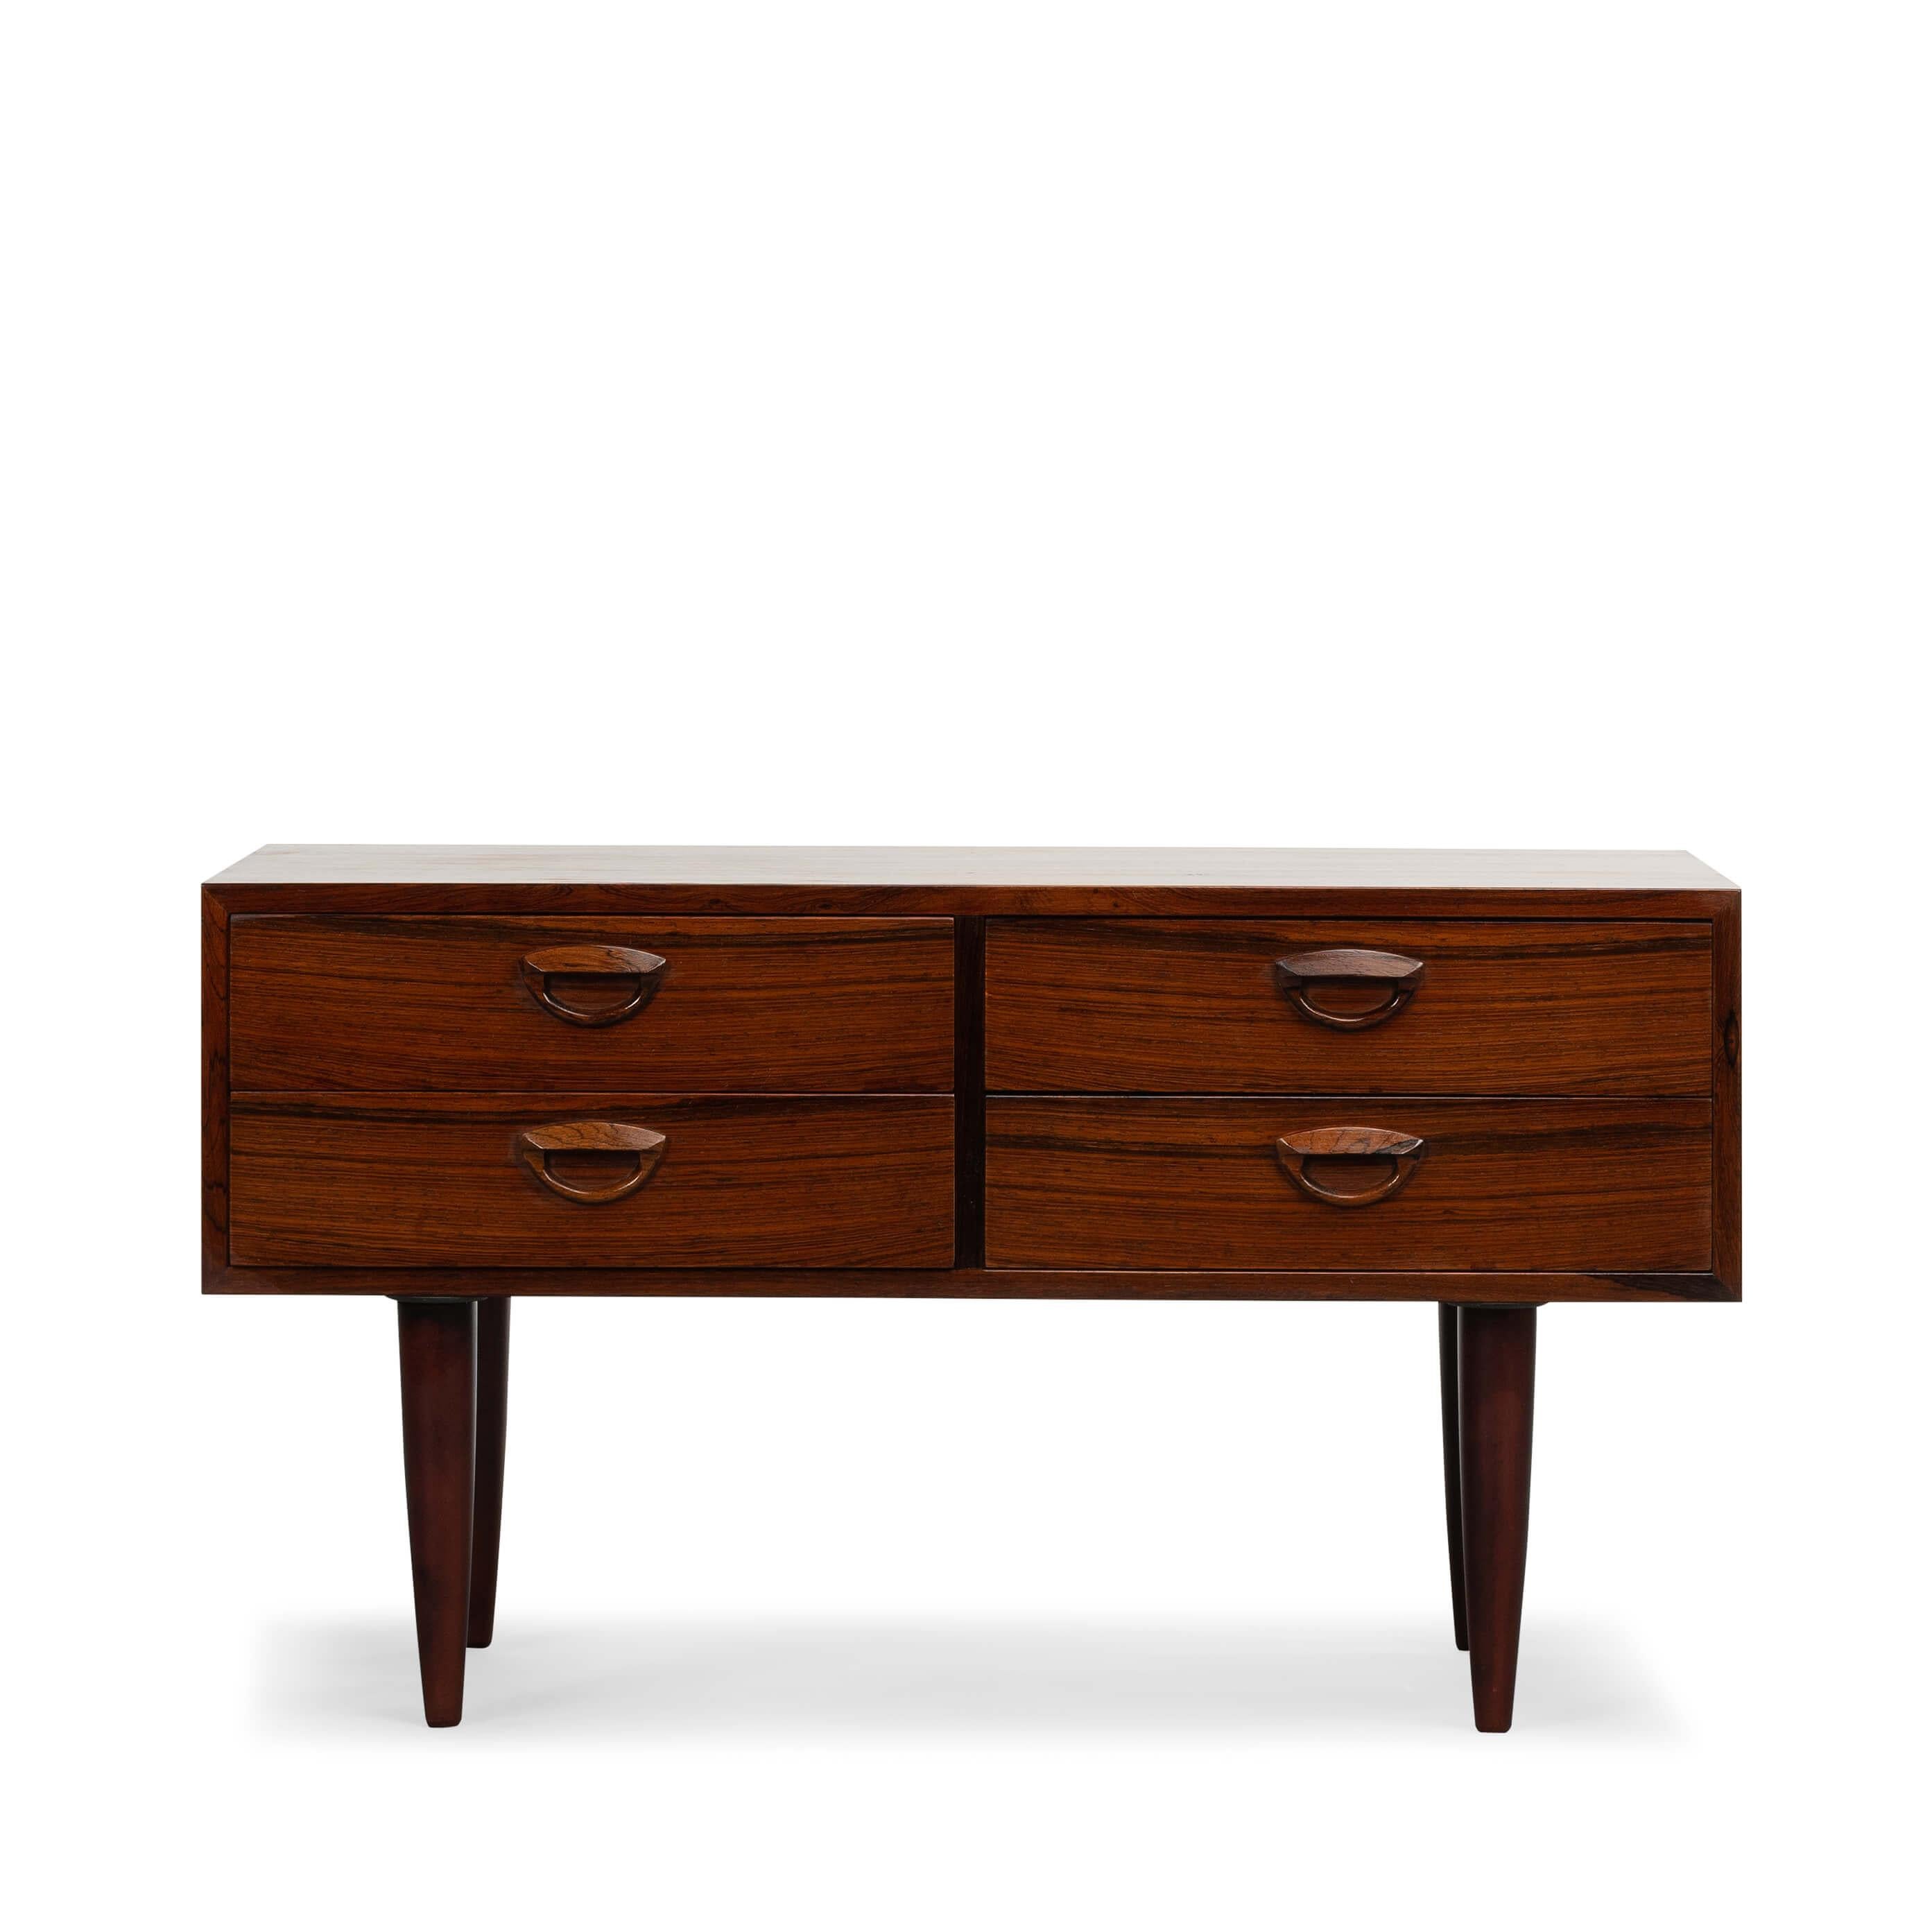 Danish Design by Kai Kristiansen
This stylish chest of drawers was designed by Kai Kristiansen and produced by Feldballes Møbelfabrik in the 1960s. 

This cabinet is made of rosewood and has beautiful detailed lines with his signature eyelid